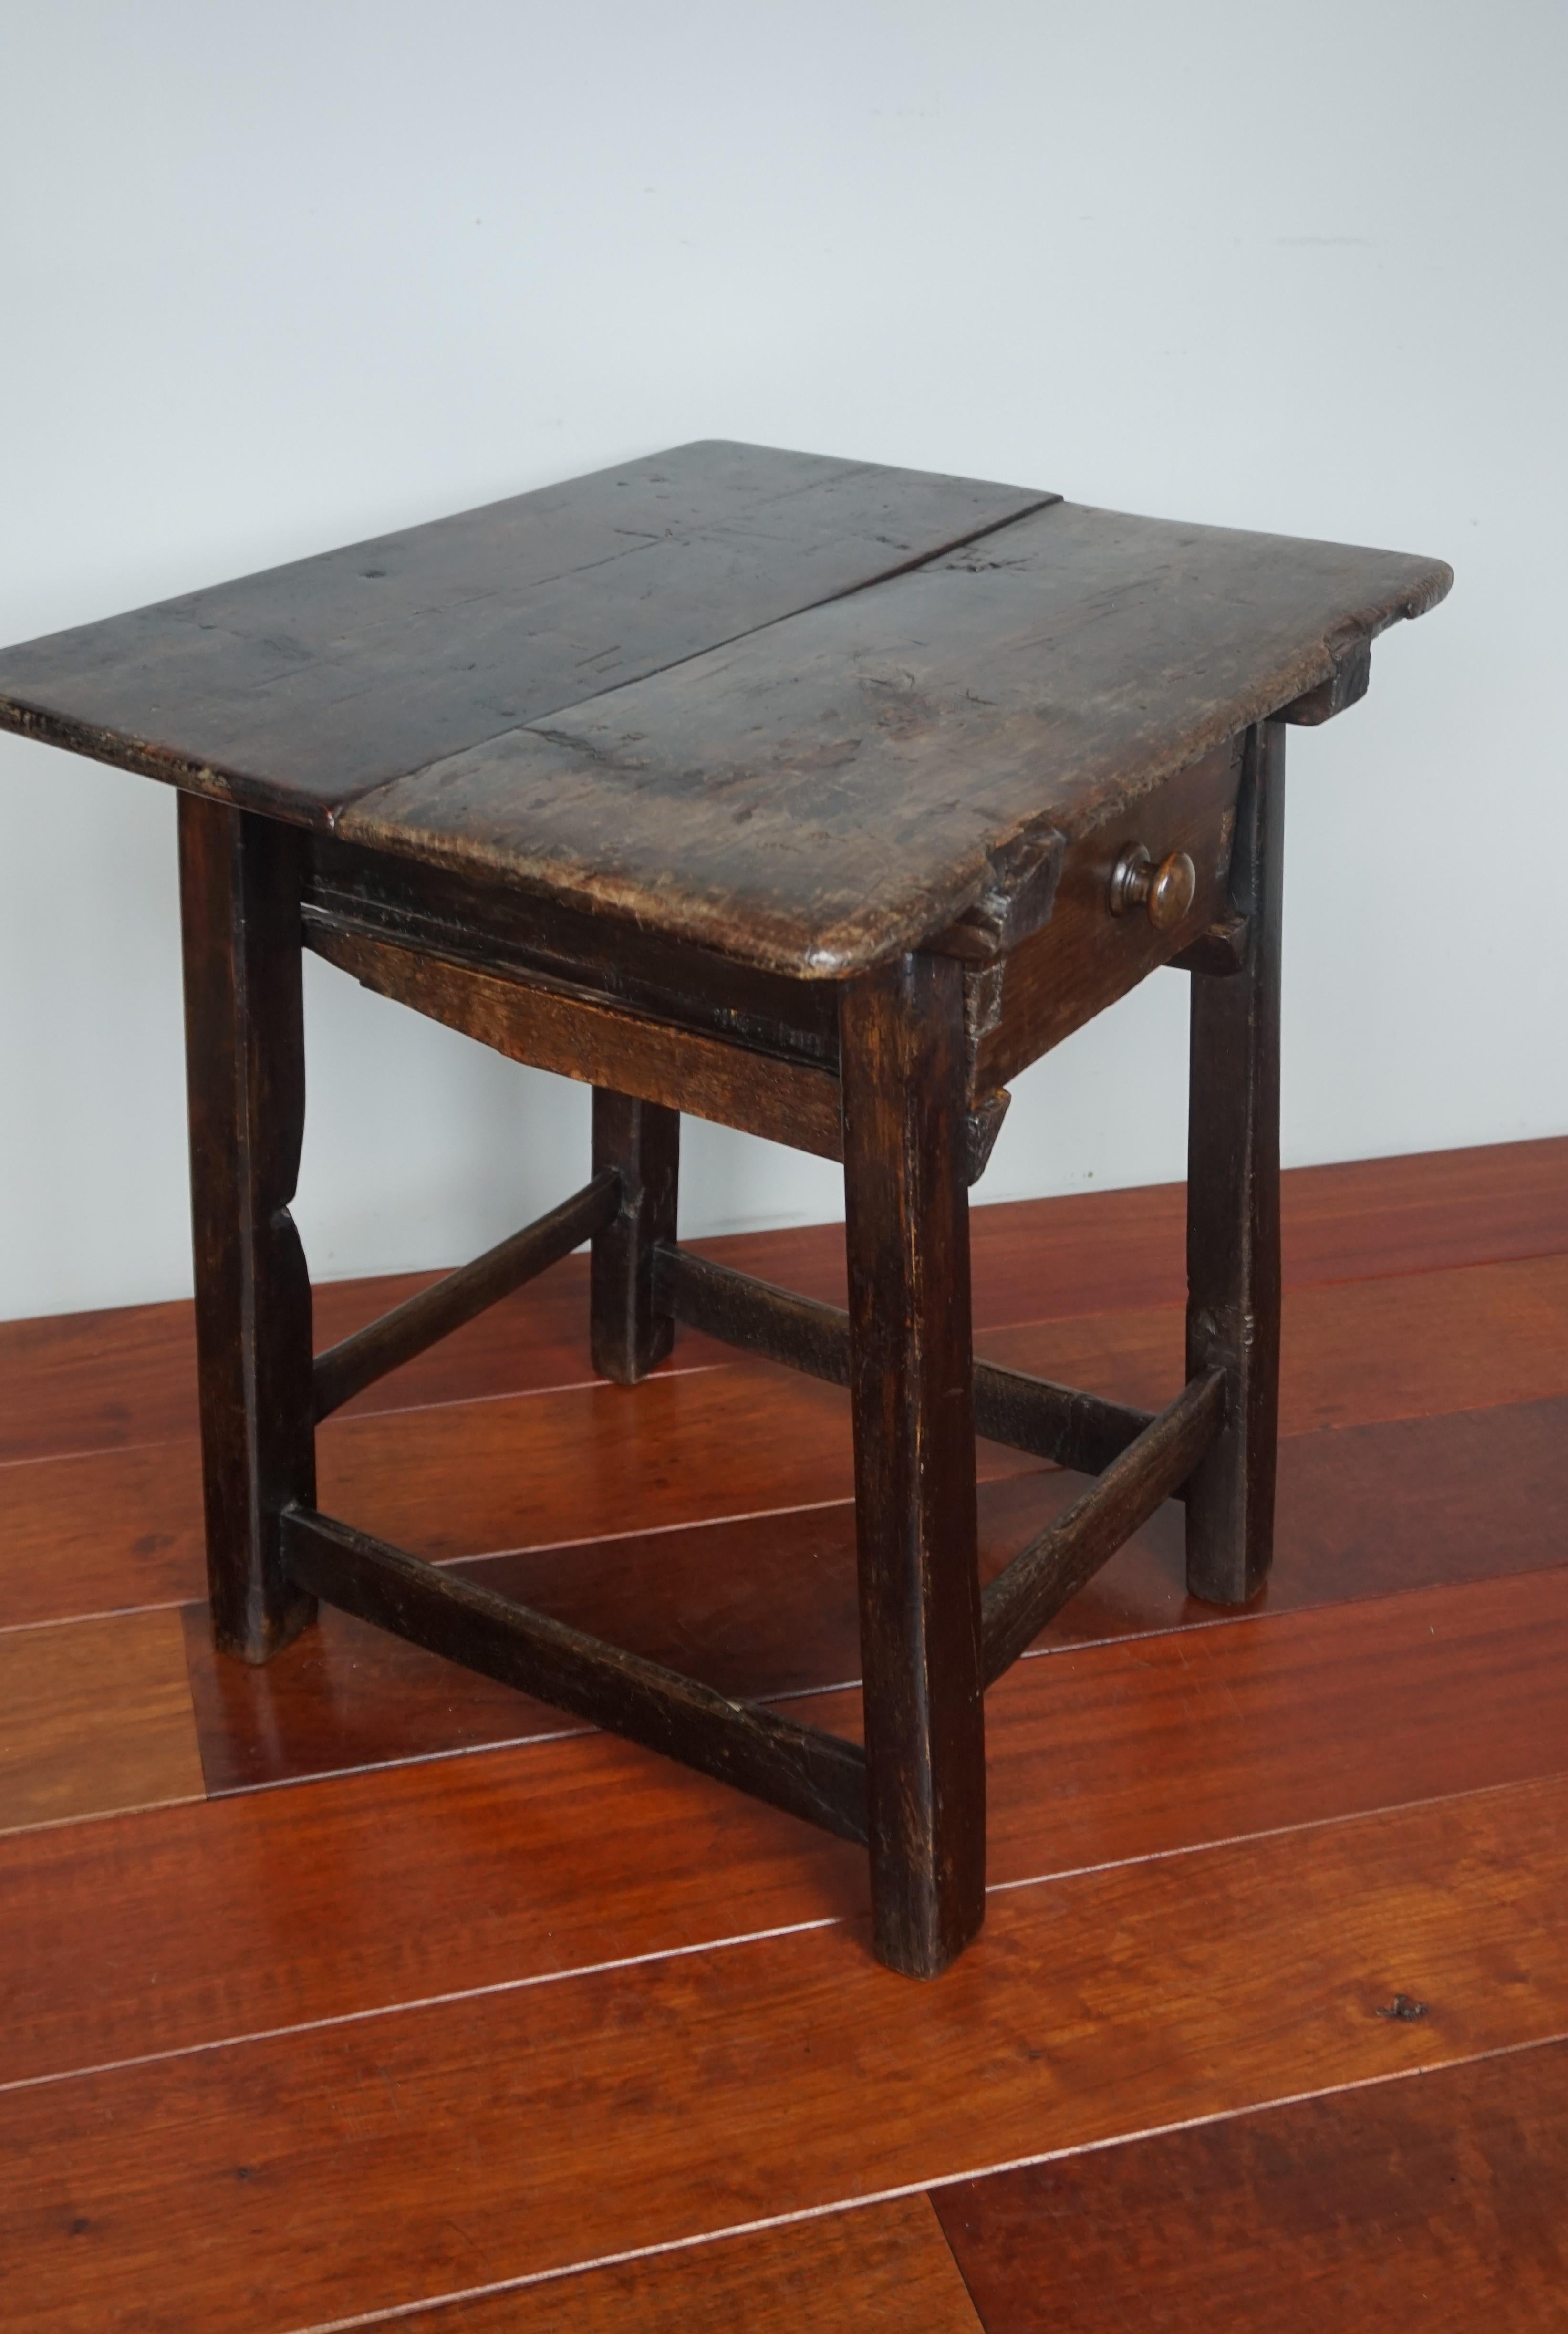 Stained Antique and Rustic Early 1700s Wooden Spanish Countryside Pay Table with Drawer